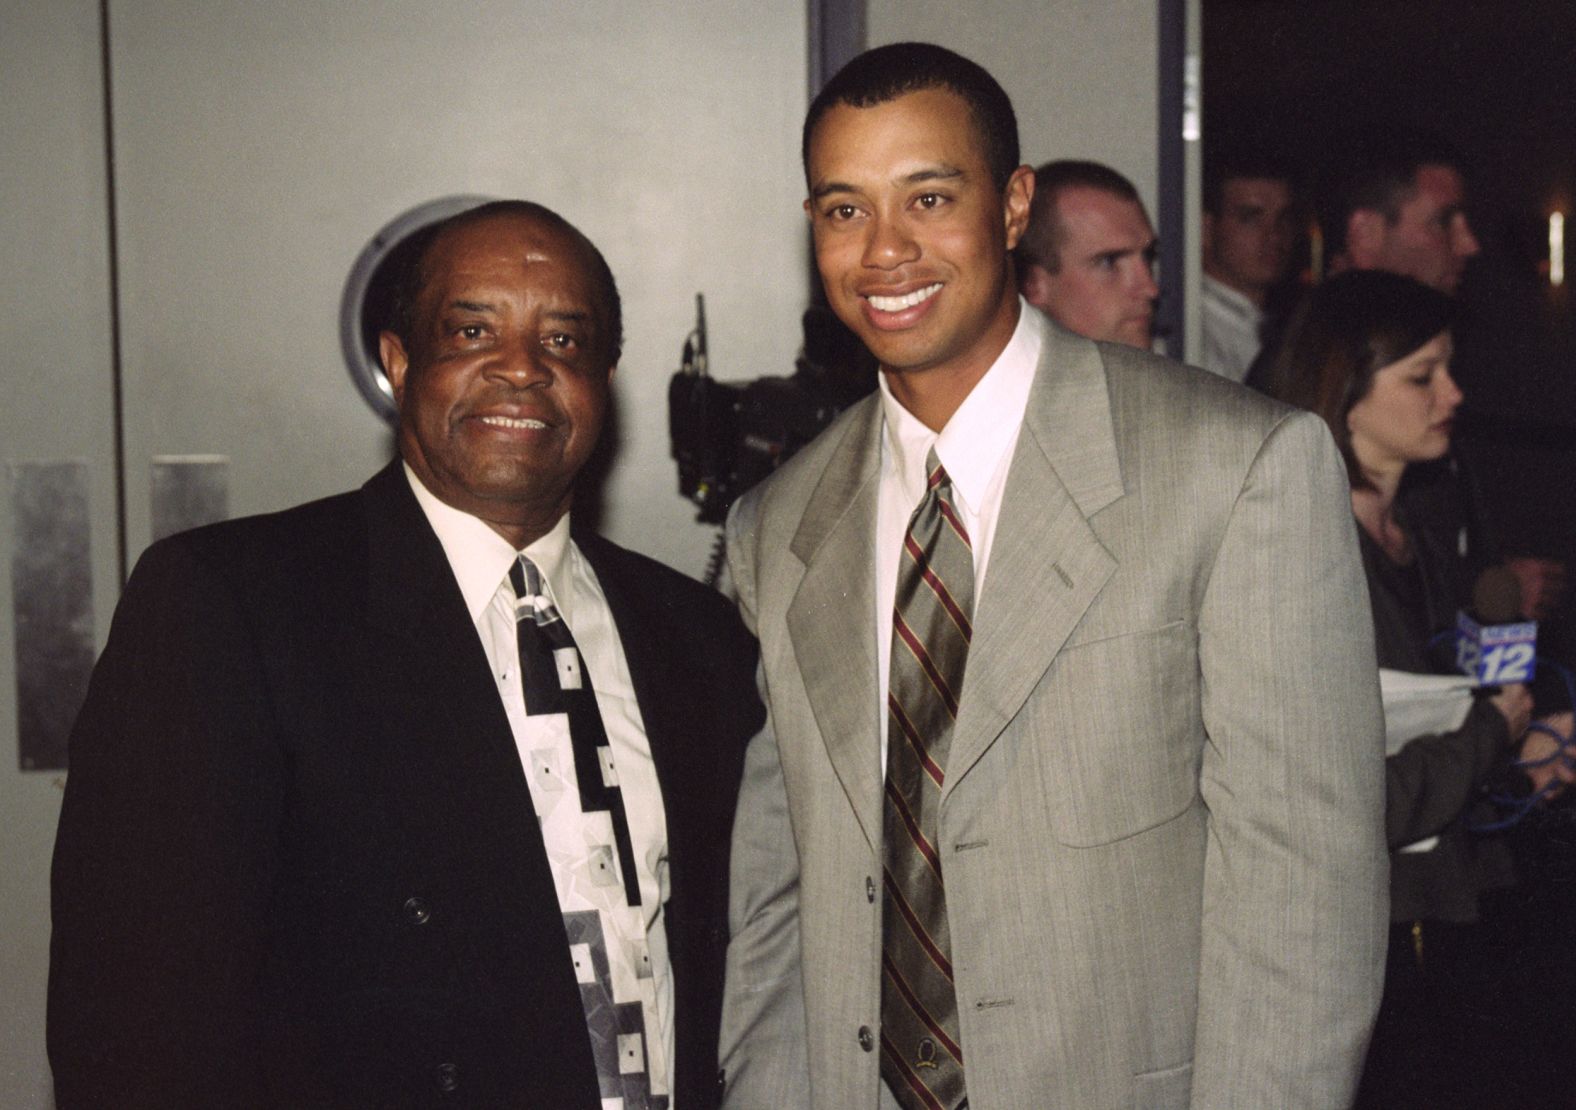 Elder poses with Tiger Woods at the 2000 Masters. "Lee Elder meant a lot to me because he was the first," Woods said after winning his first Masters. "He was the one that I looked up to. And because of what he did, I was able to play here, which was my dream."